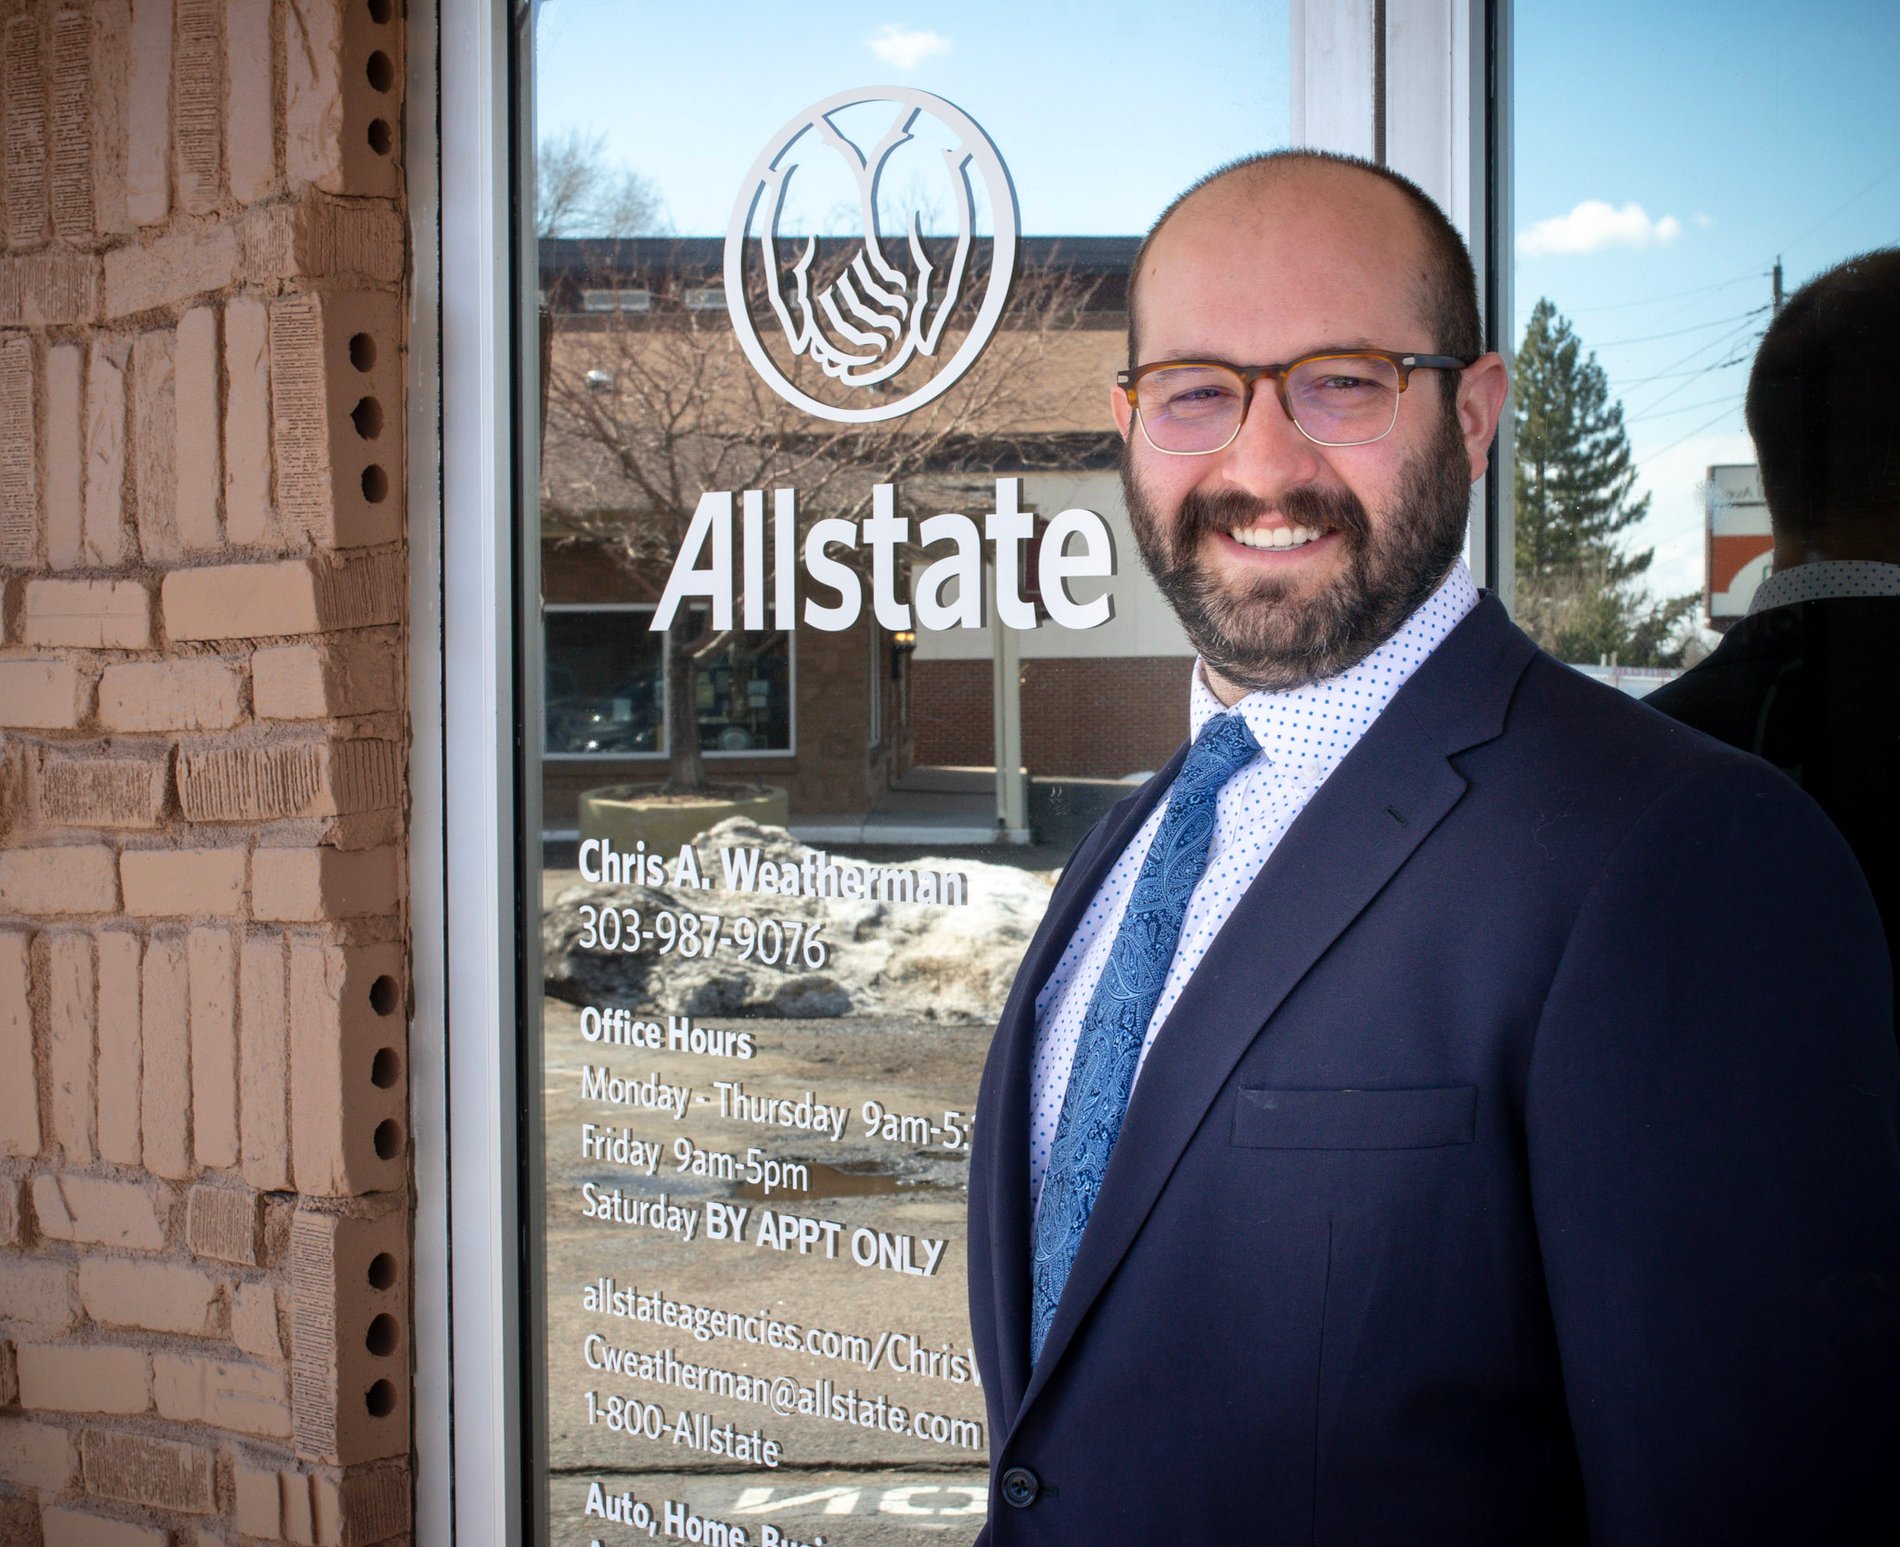 Allstate Car Insurance in Lakewood, CO Chris A. Weatherman